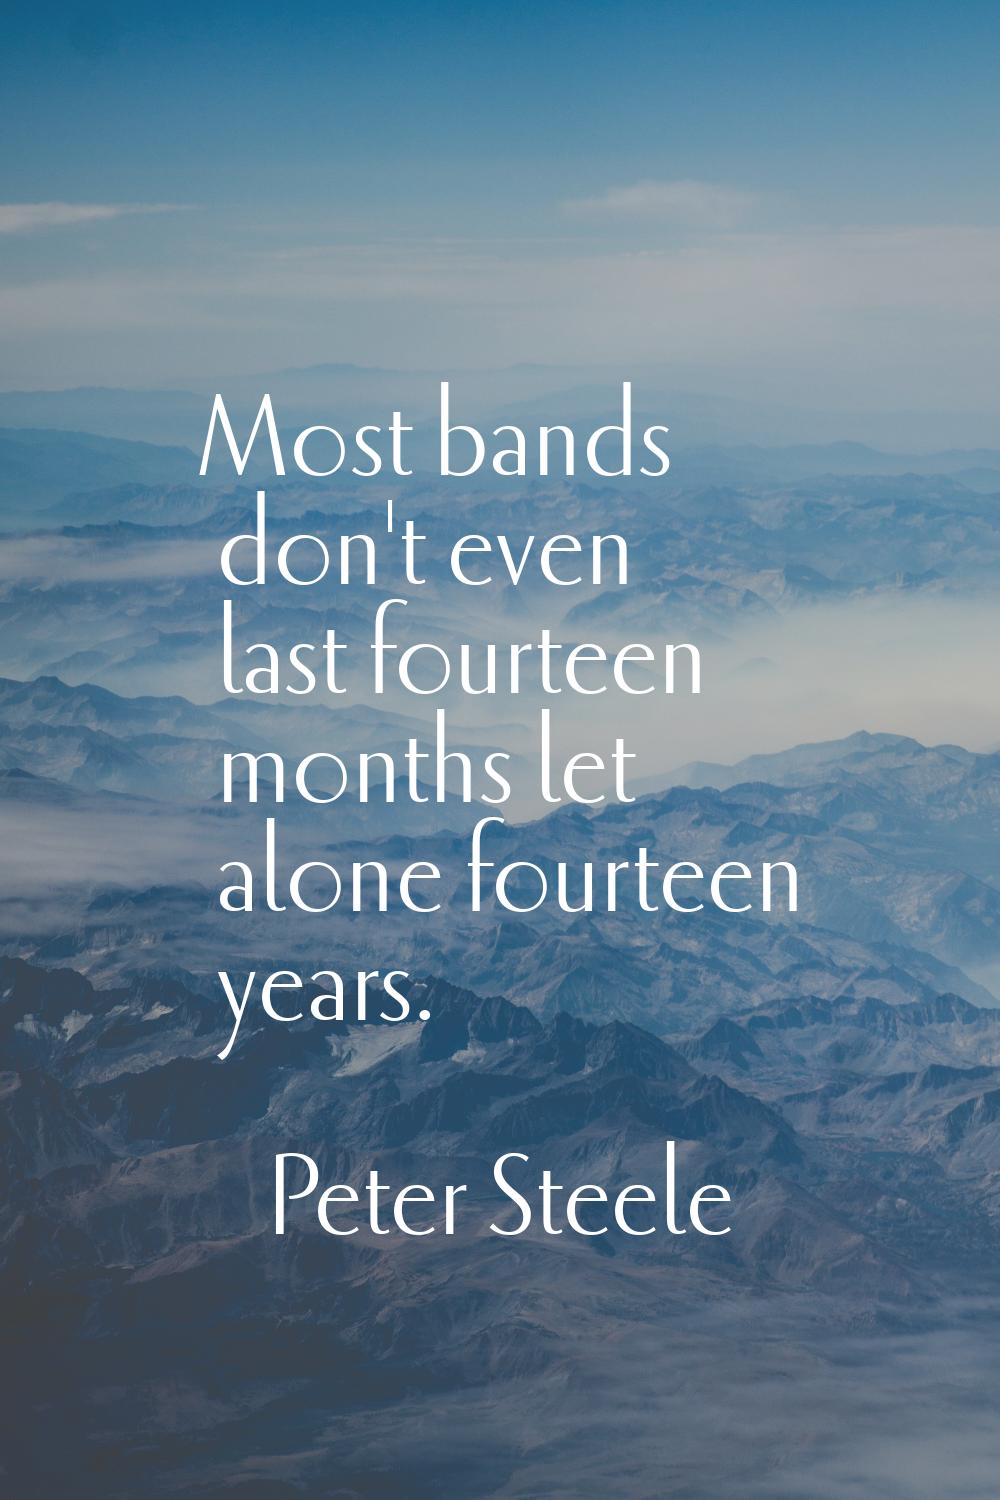 Most bands don't even last fourteen months let alone fourteen years.